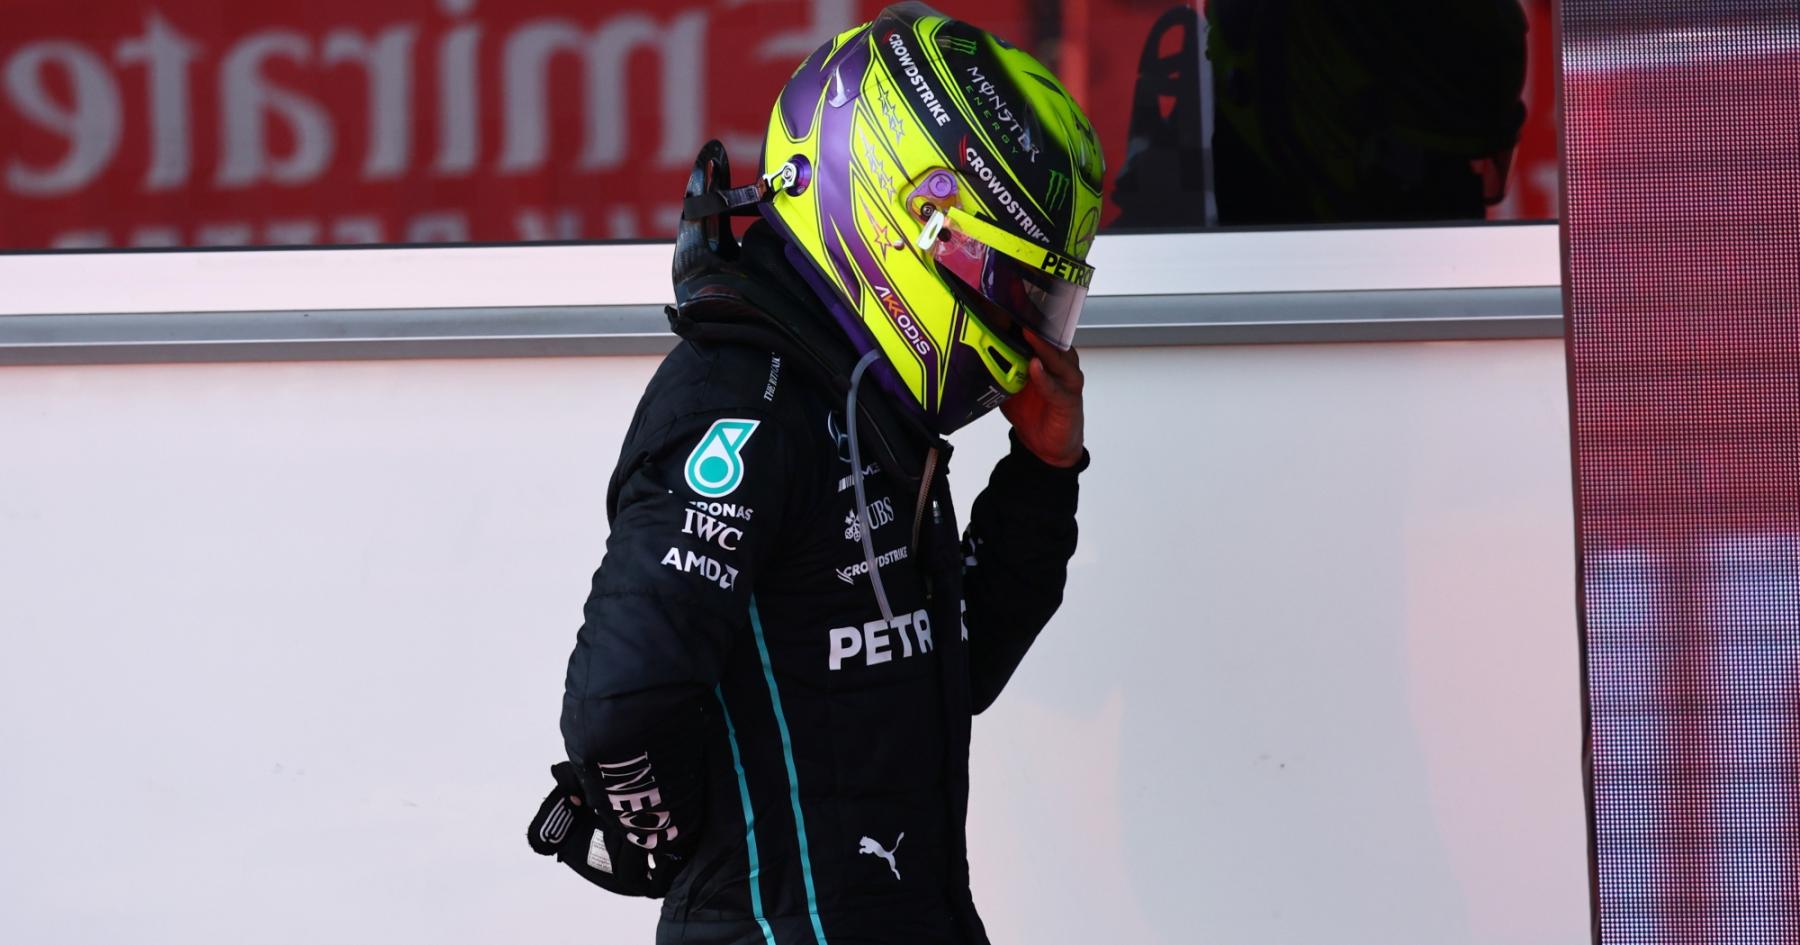 The Future of Mercedes Racing Hangs in the Balance as Hamilton&#8217;s Departure Looms